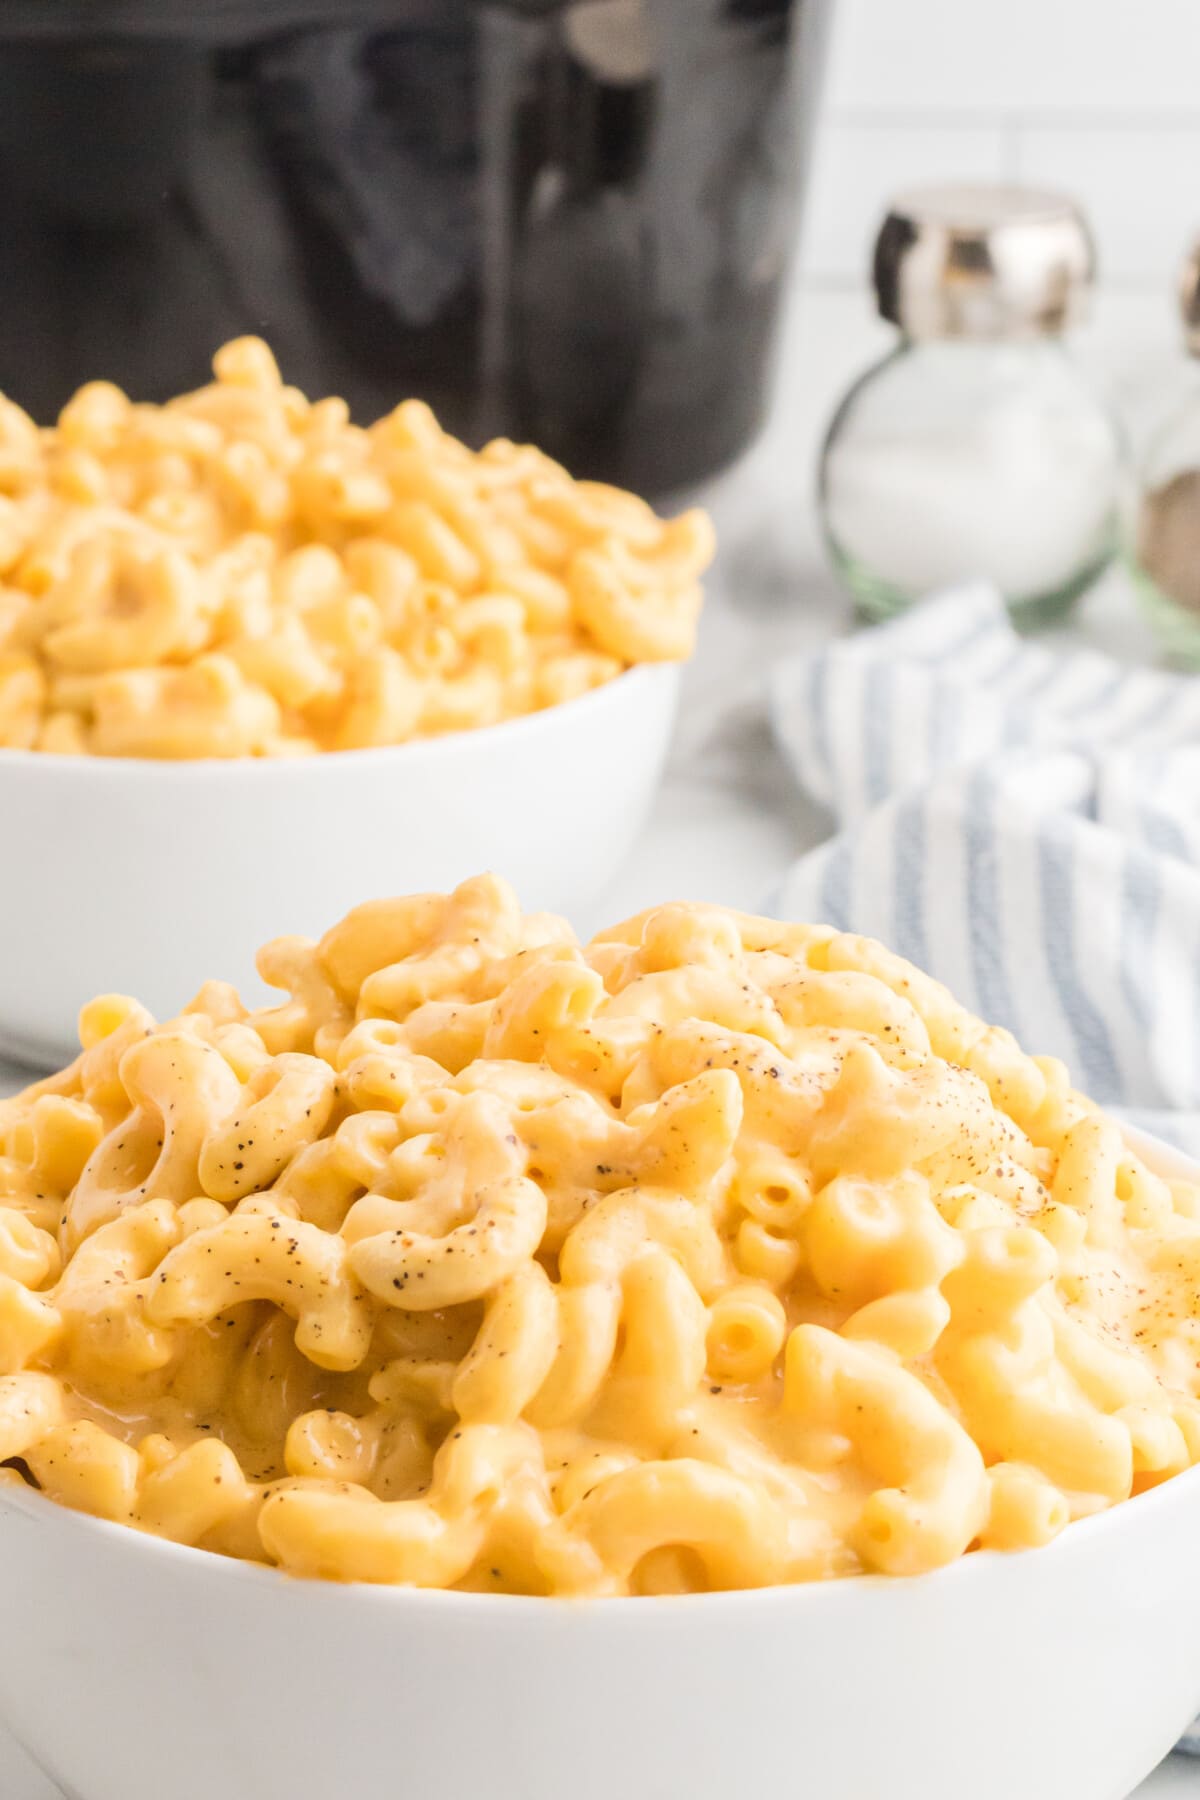 https://kitchenfunwithmy3sons.com/wp-content/uploads/2022/07/Crockpot-Mac-and-Cheese-5-1-1200x1800.jpg